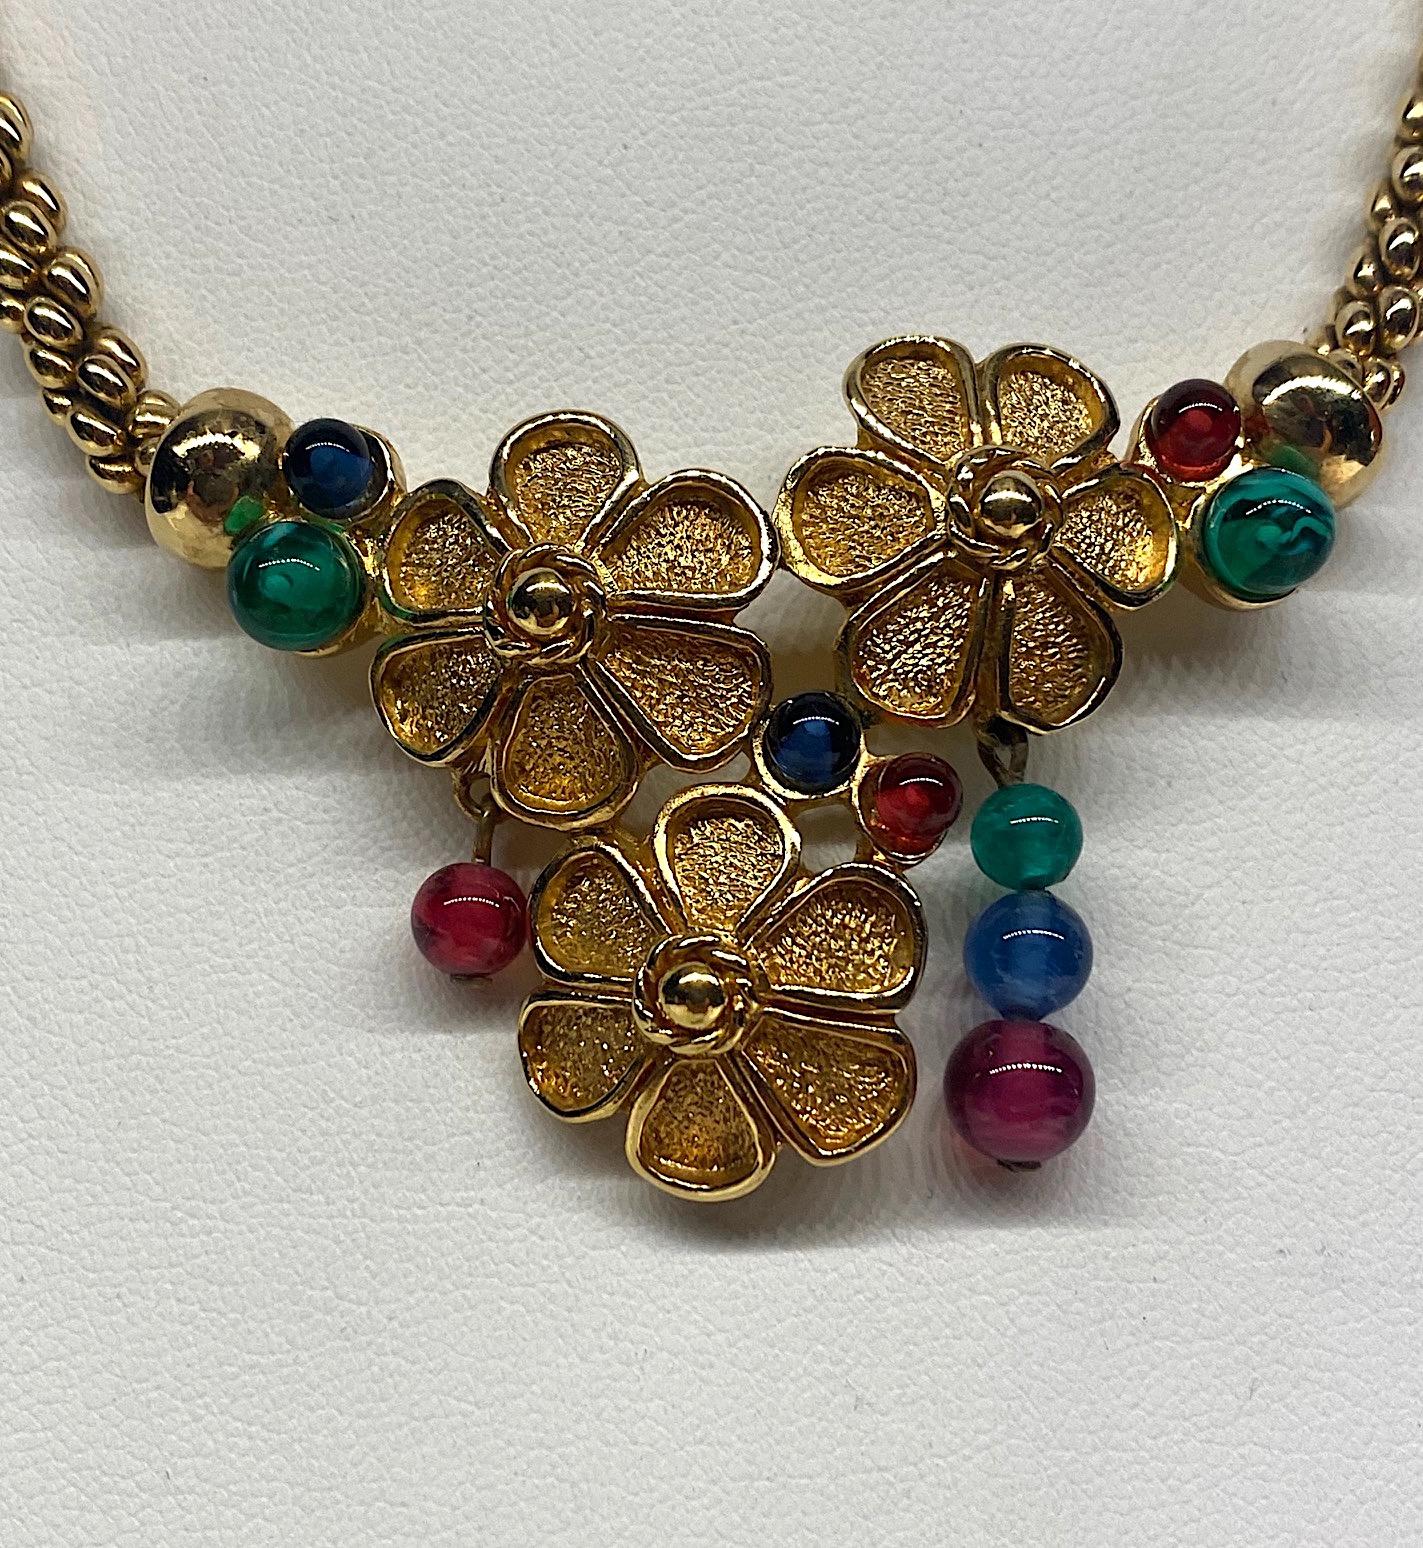 Women's Grosse, Germany 1980s Red, Blue & Green Bead Floral Cluster Necklace 